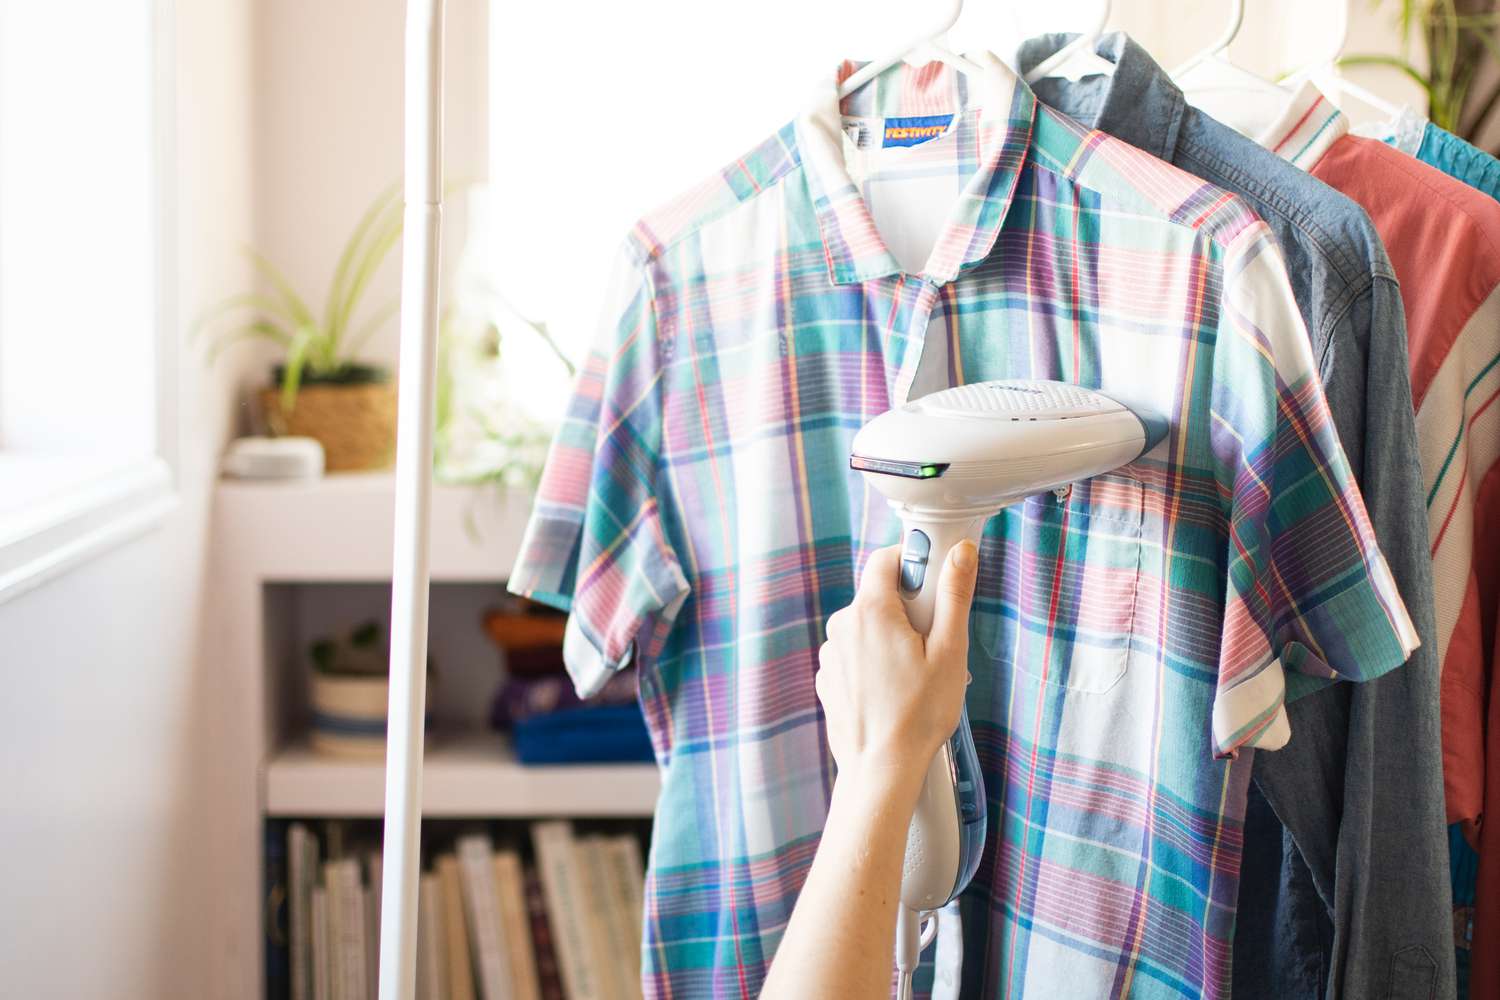 Clothes steamer taking out wrinkles on plaid shirt